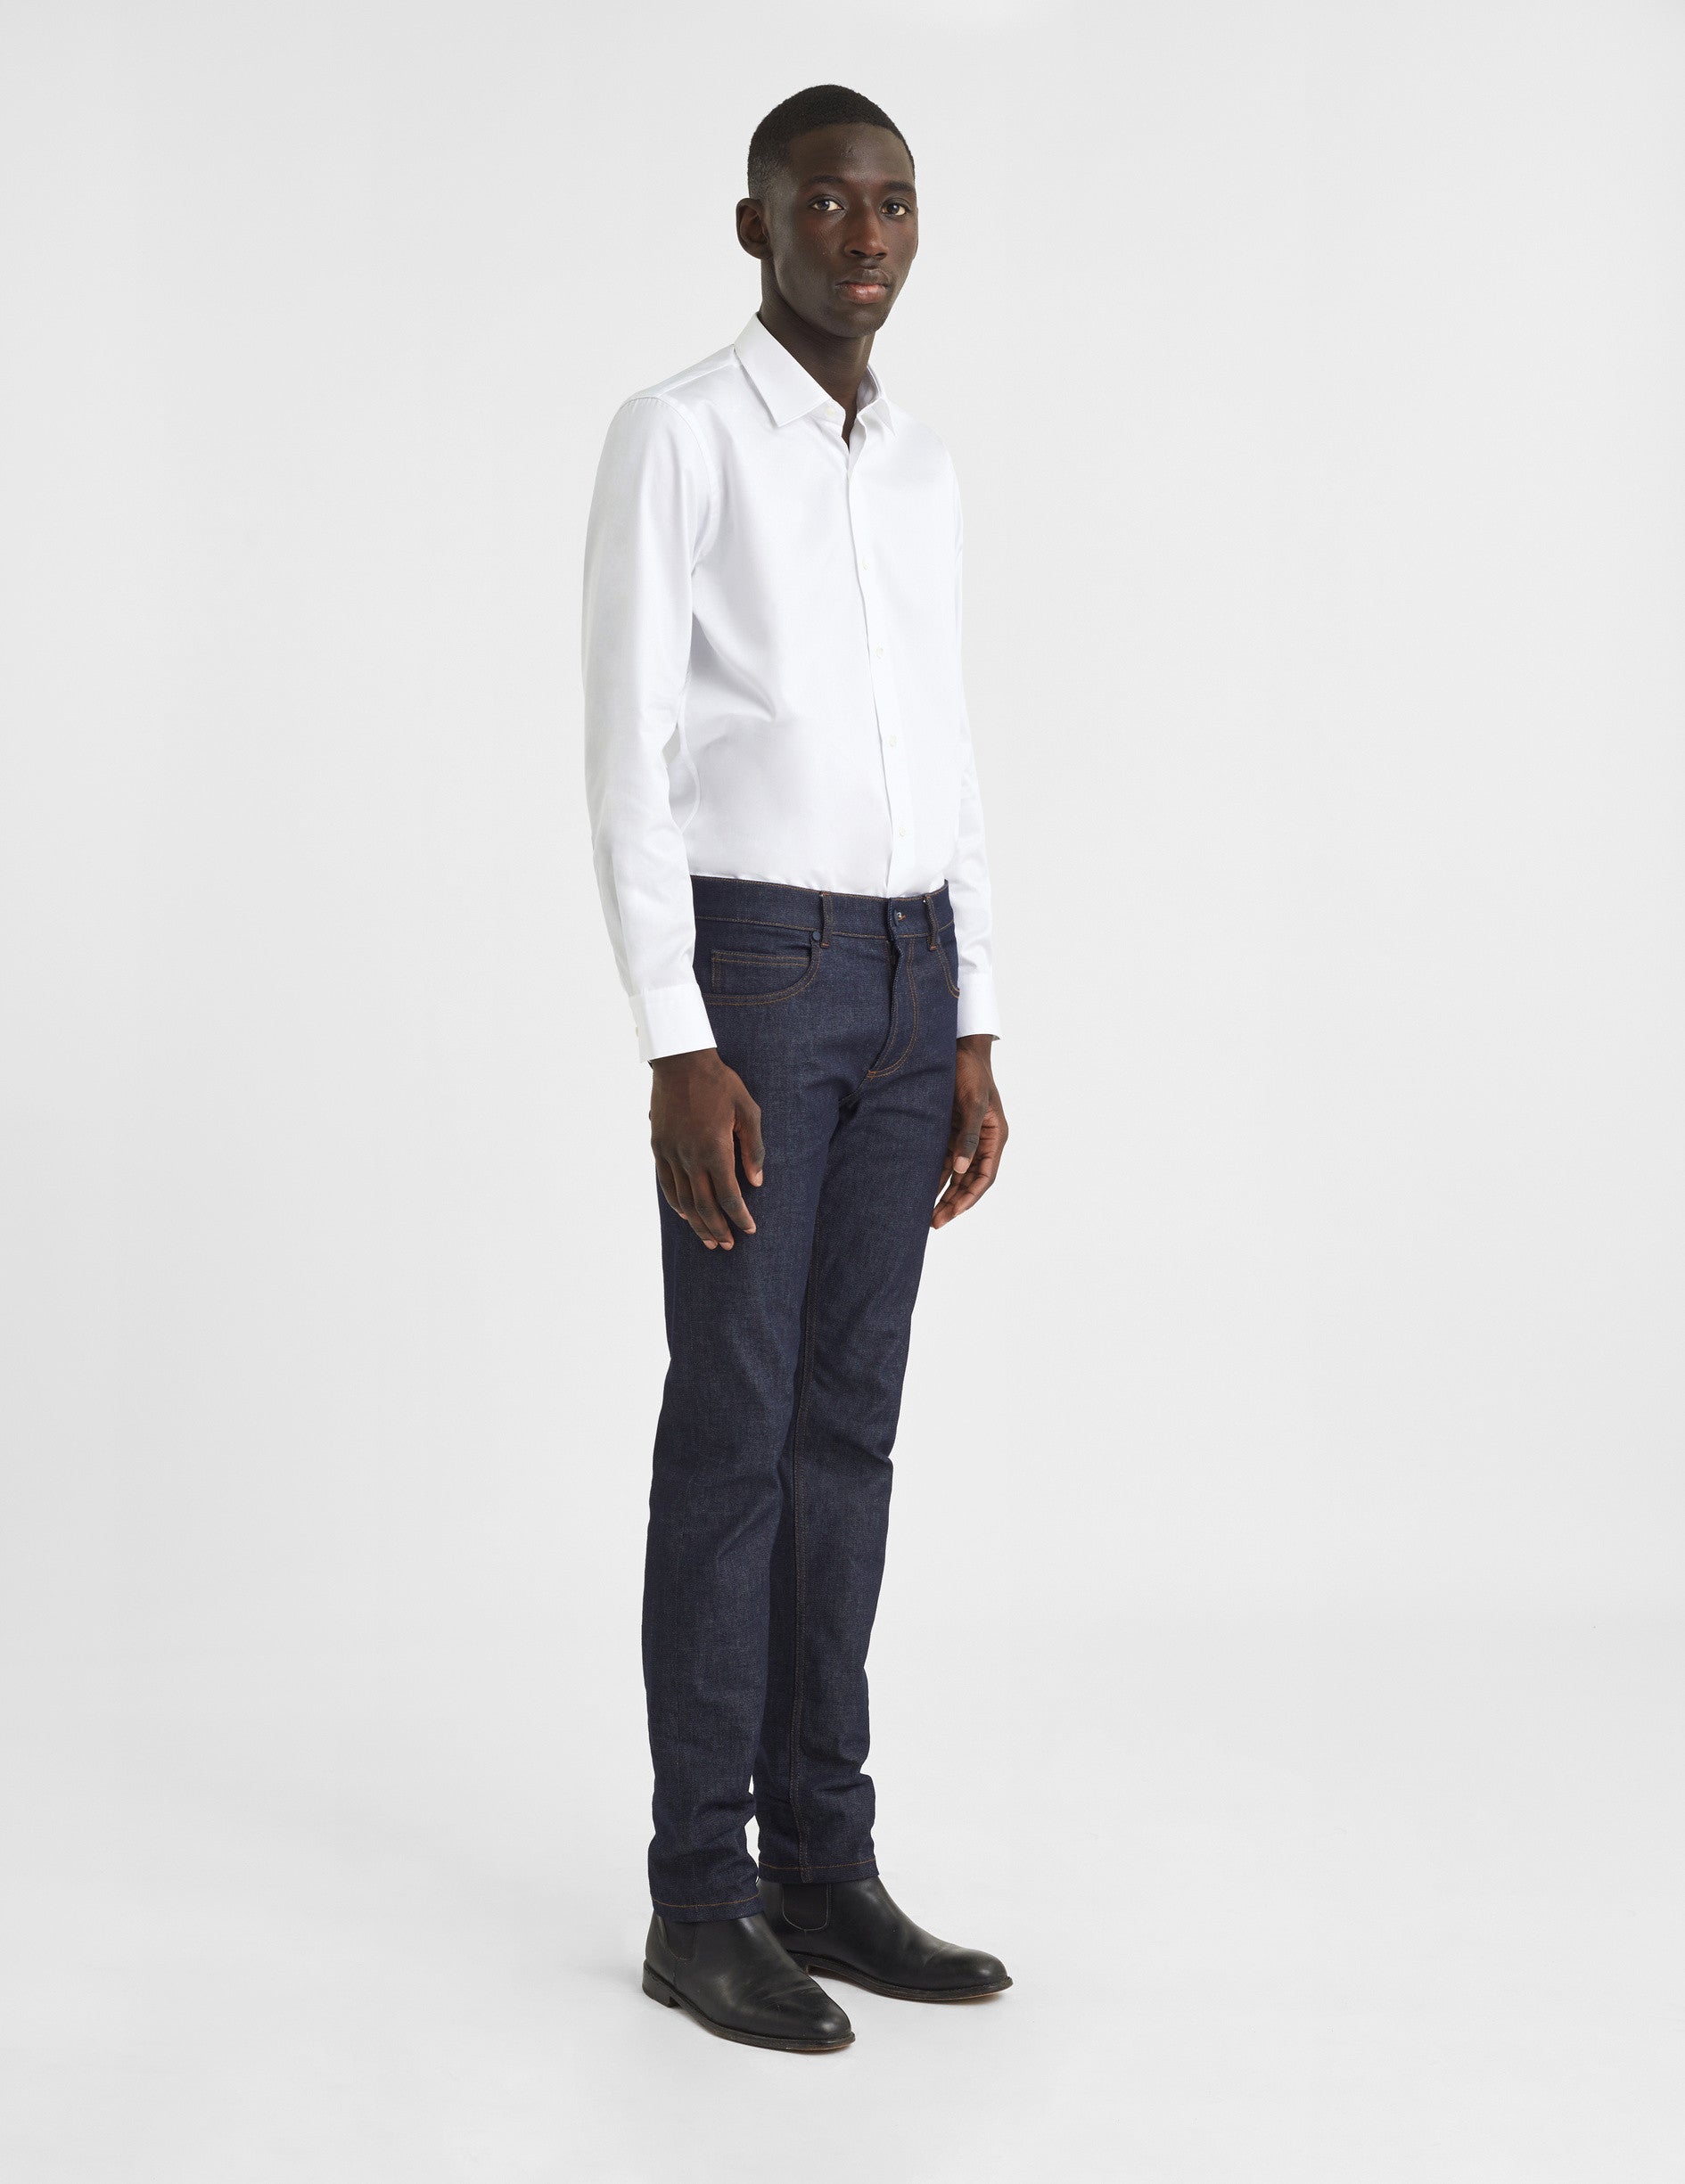 Semi-fitted white shirt - Twill - Figaret Collar